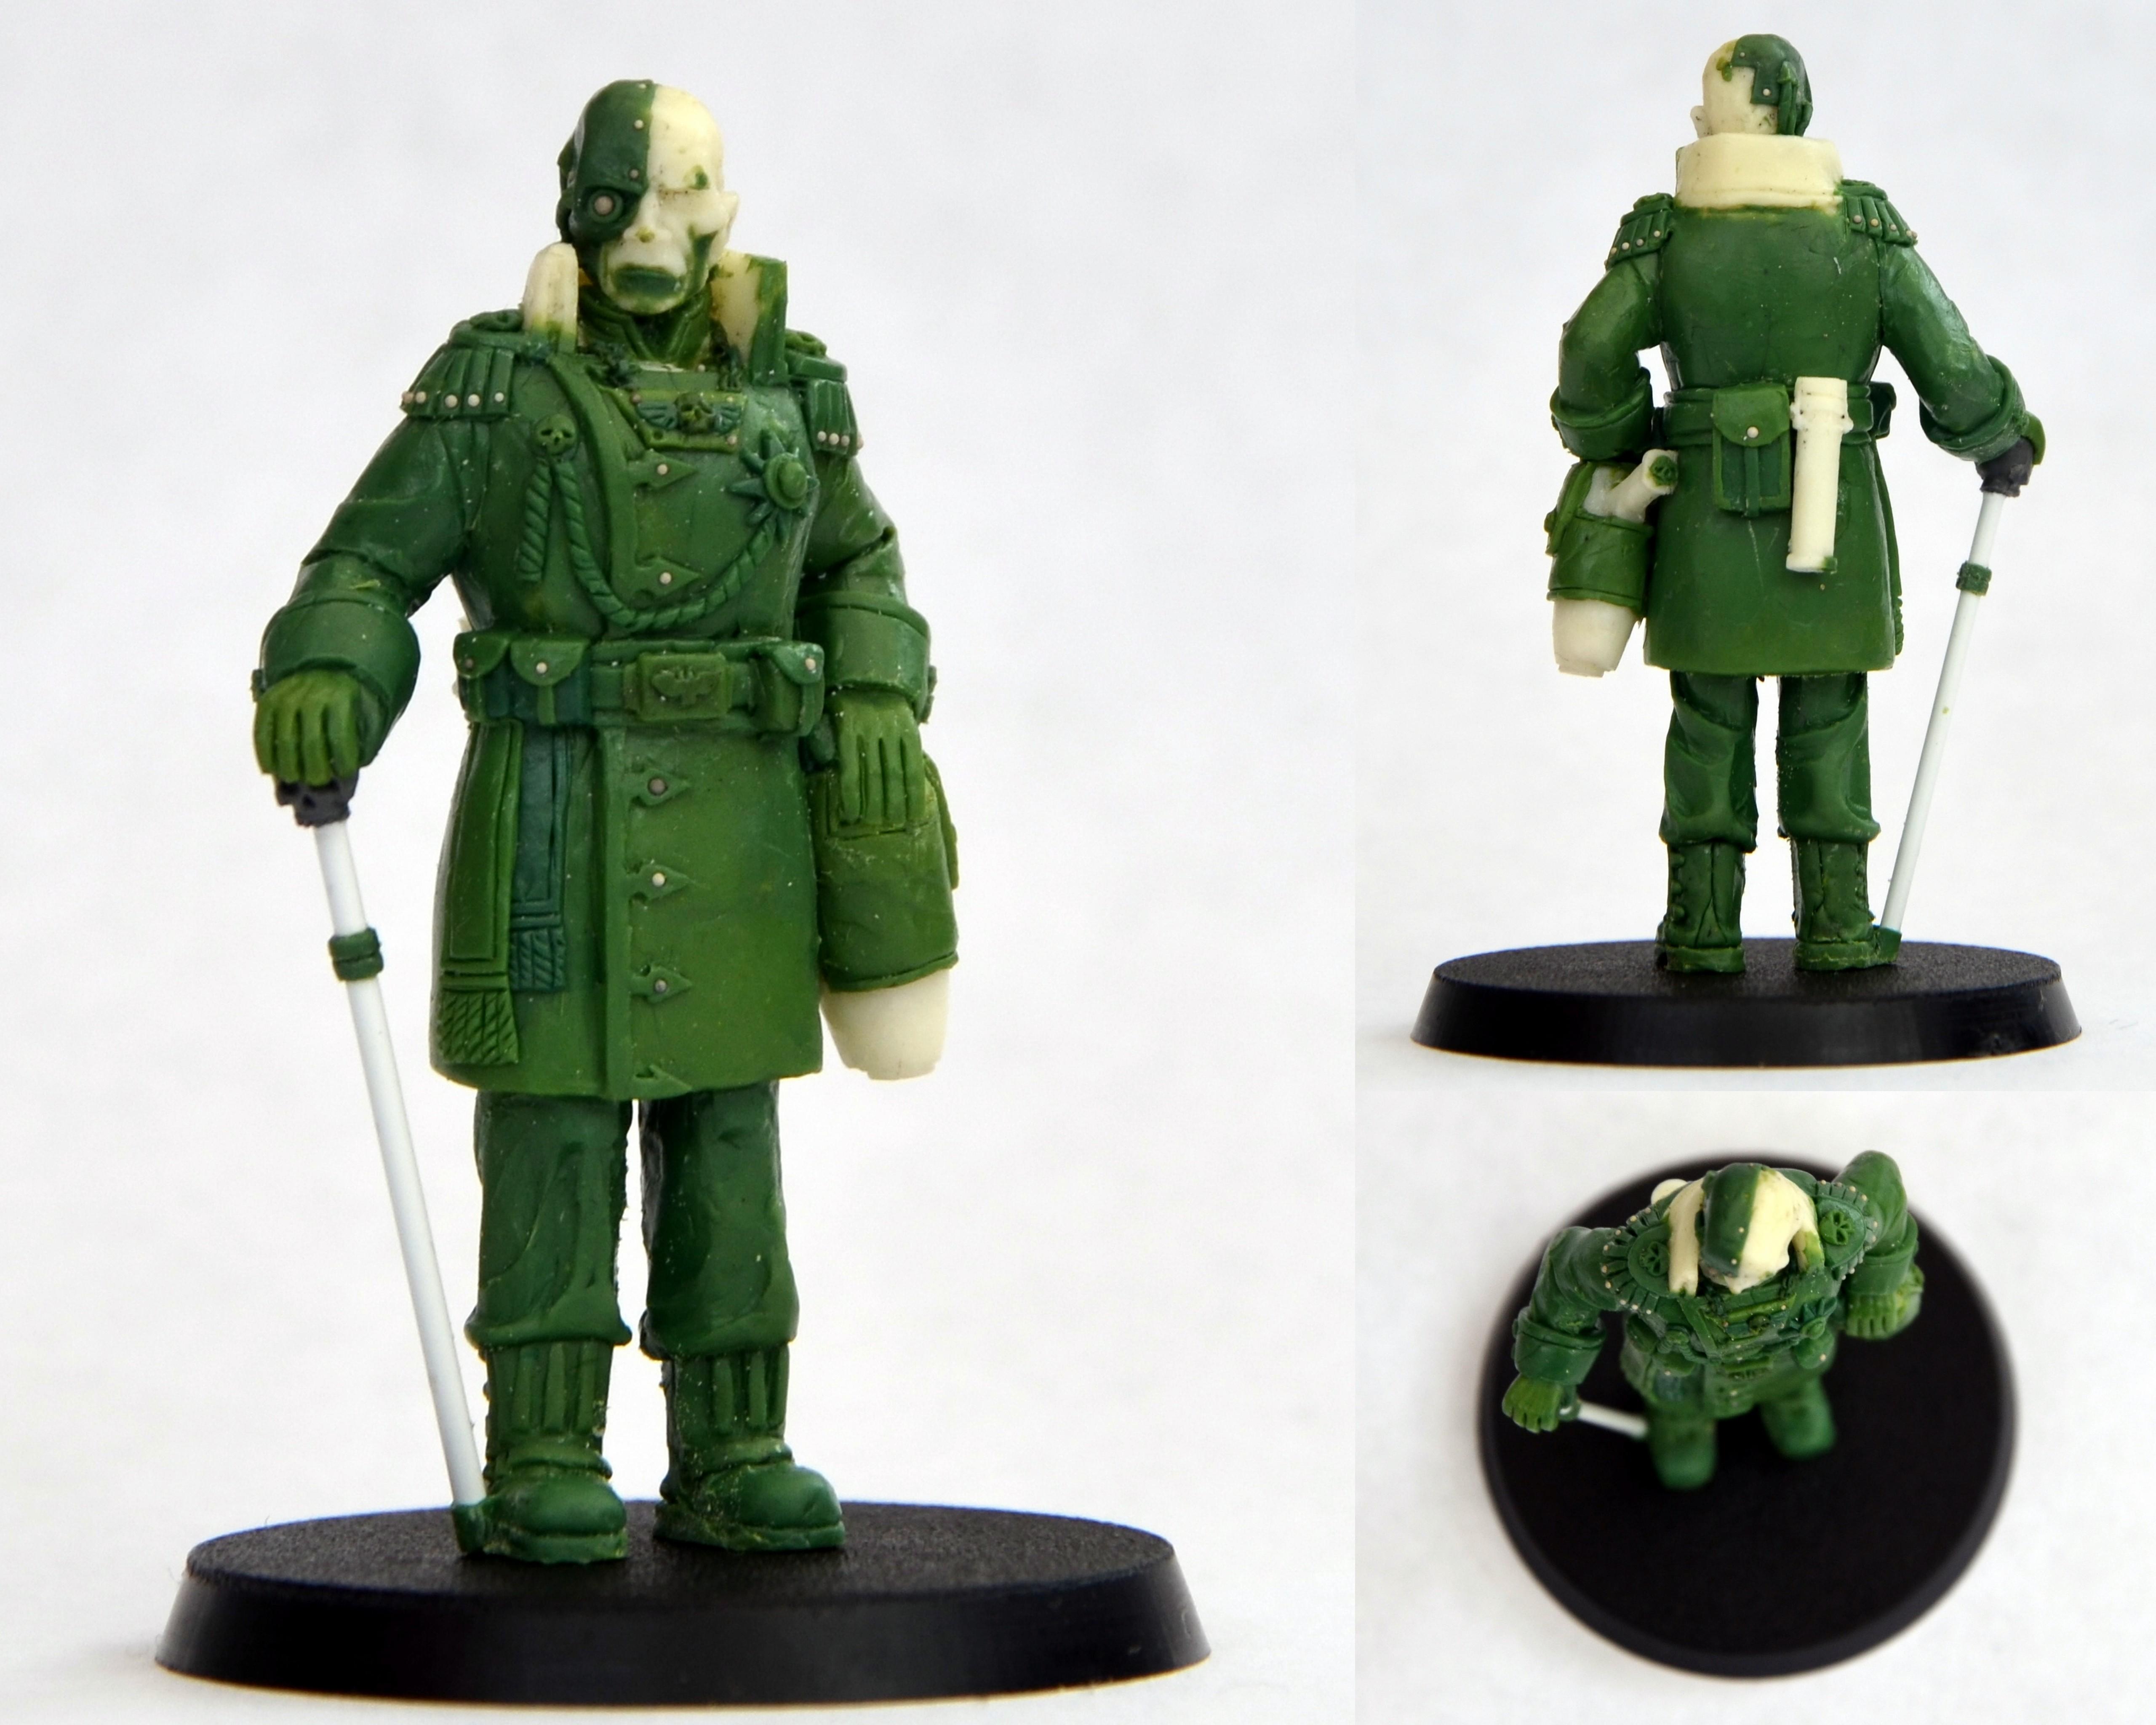 54mm, General, Governor, Imperial Guard, Inquisitor, Officer, Scratch Build, Sculpting, Warhammer 40,000